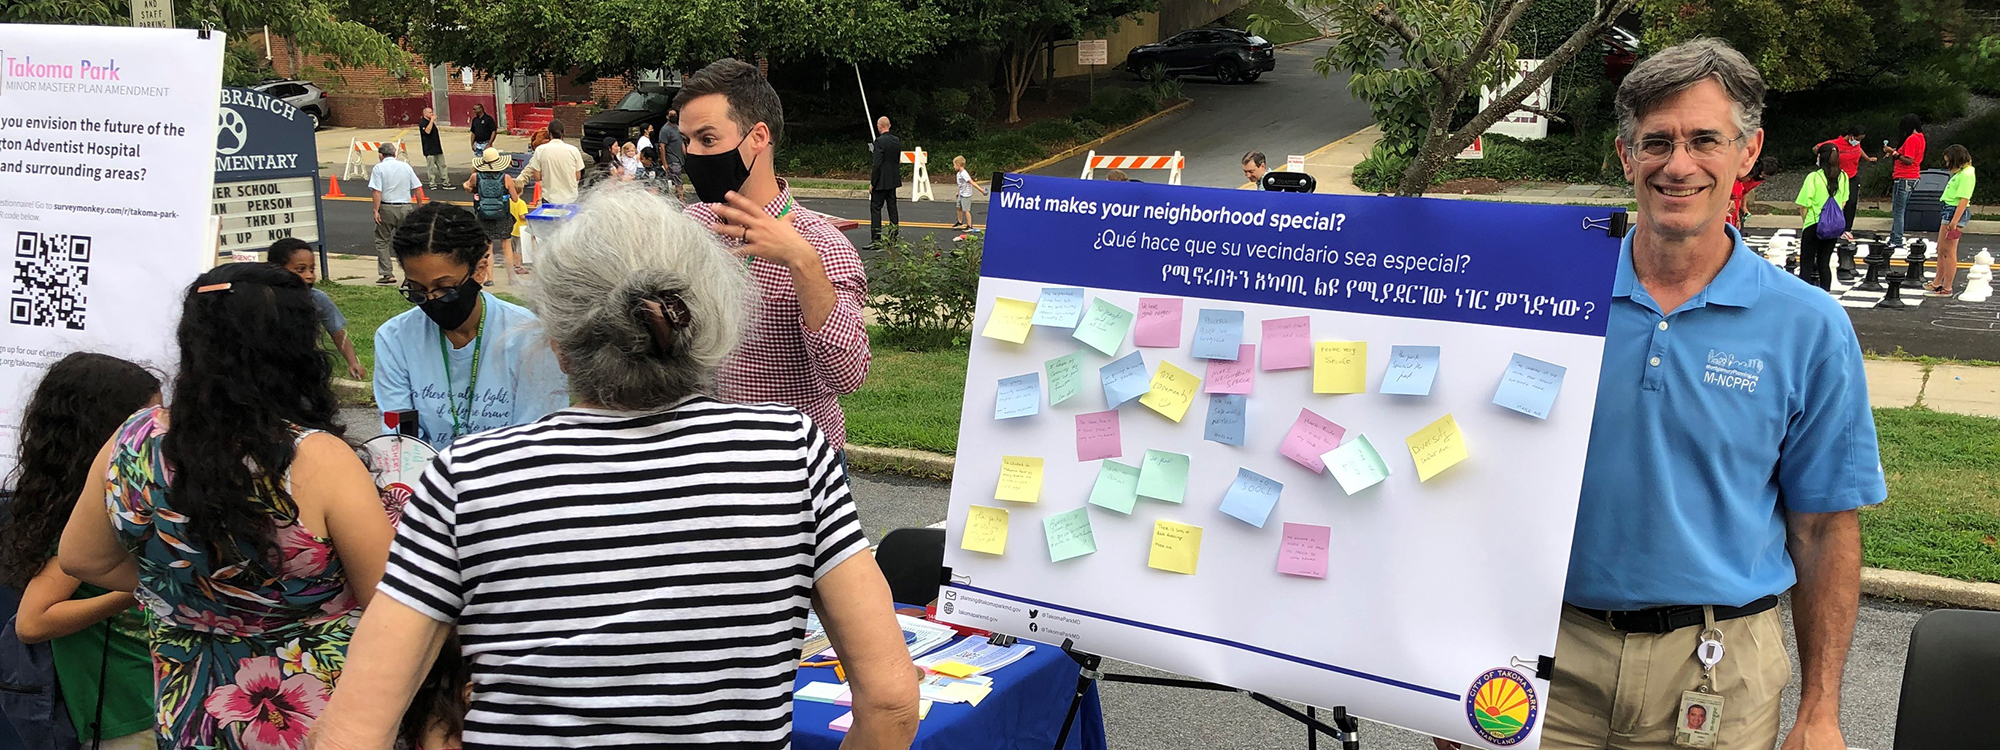 The image shows a man standing behind a sign at Takoma Park's National Night Out event that says 